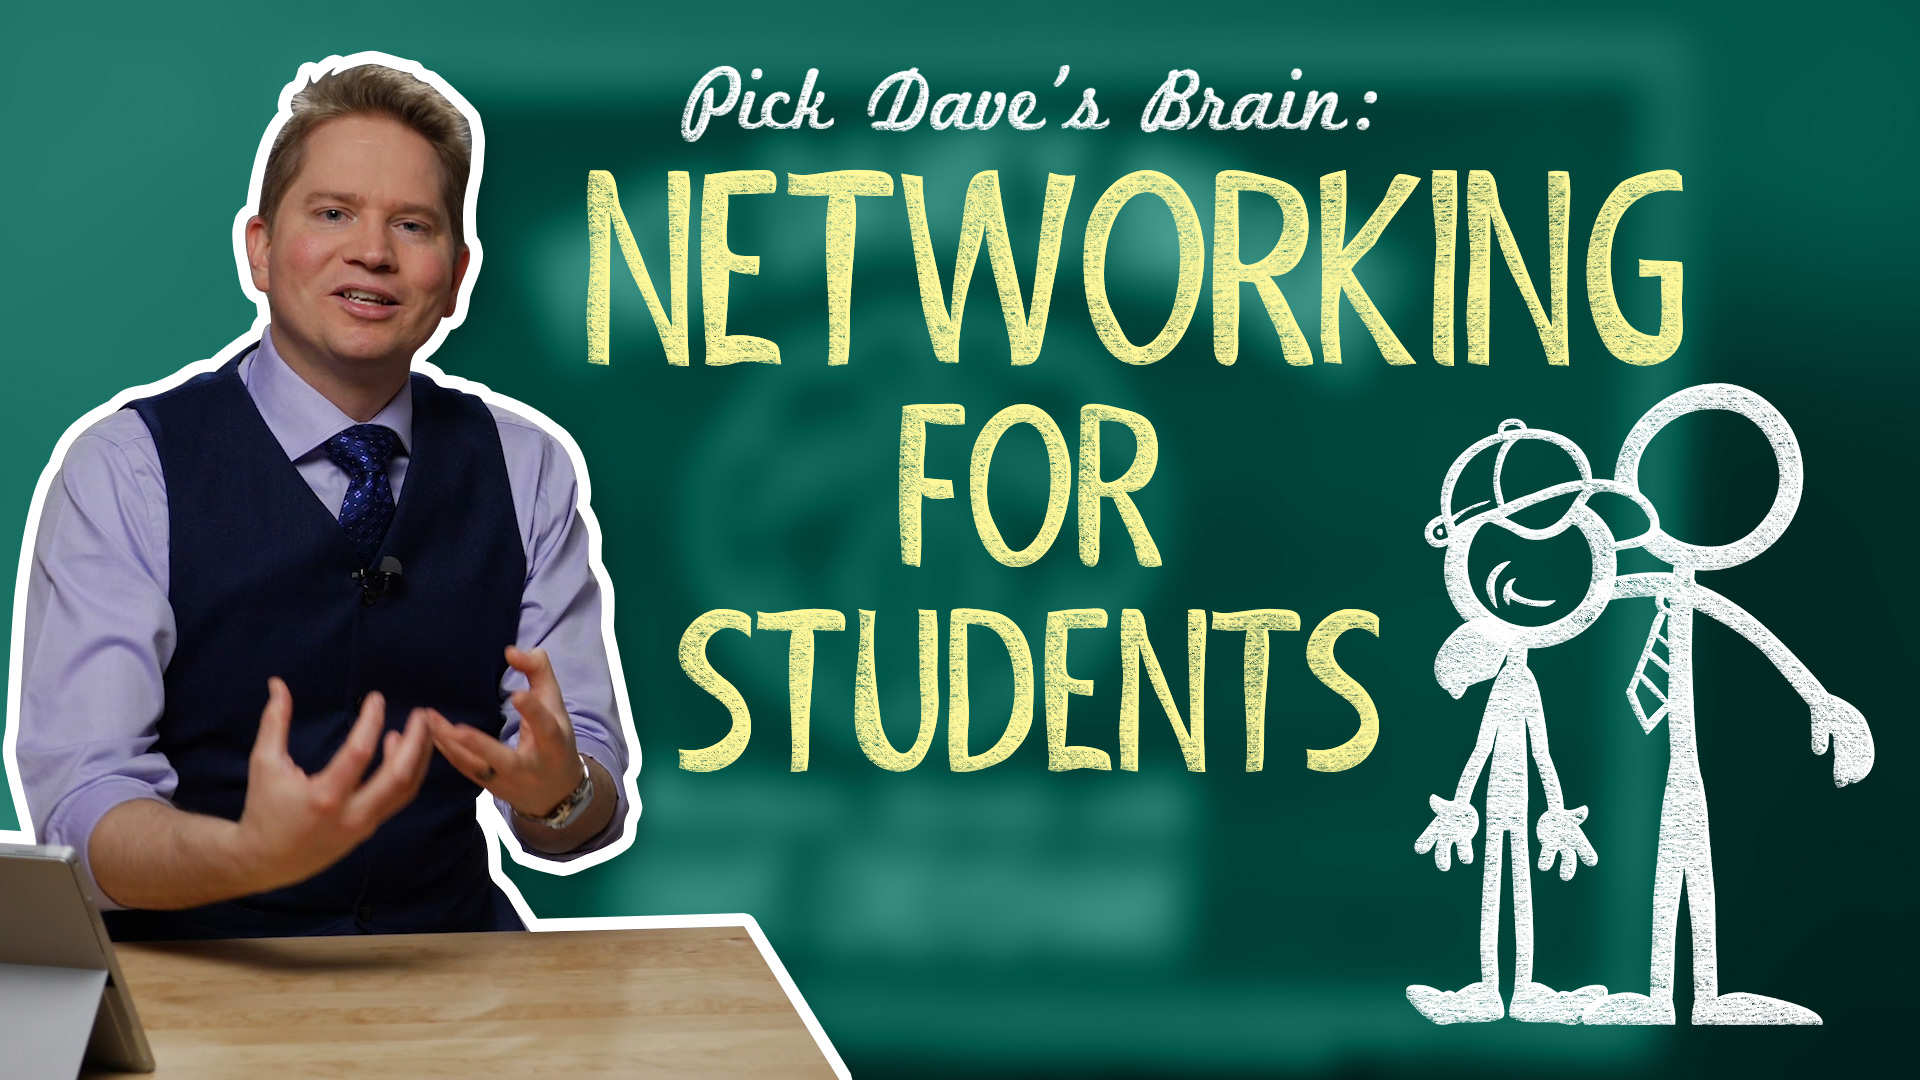 Professional networking for students – Pick Dave’s Brain